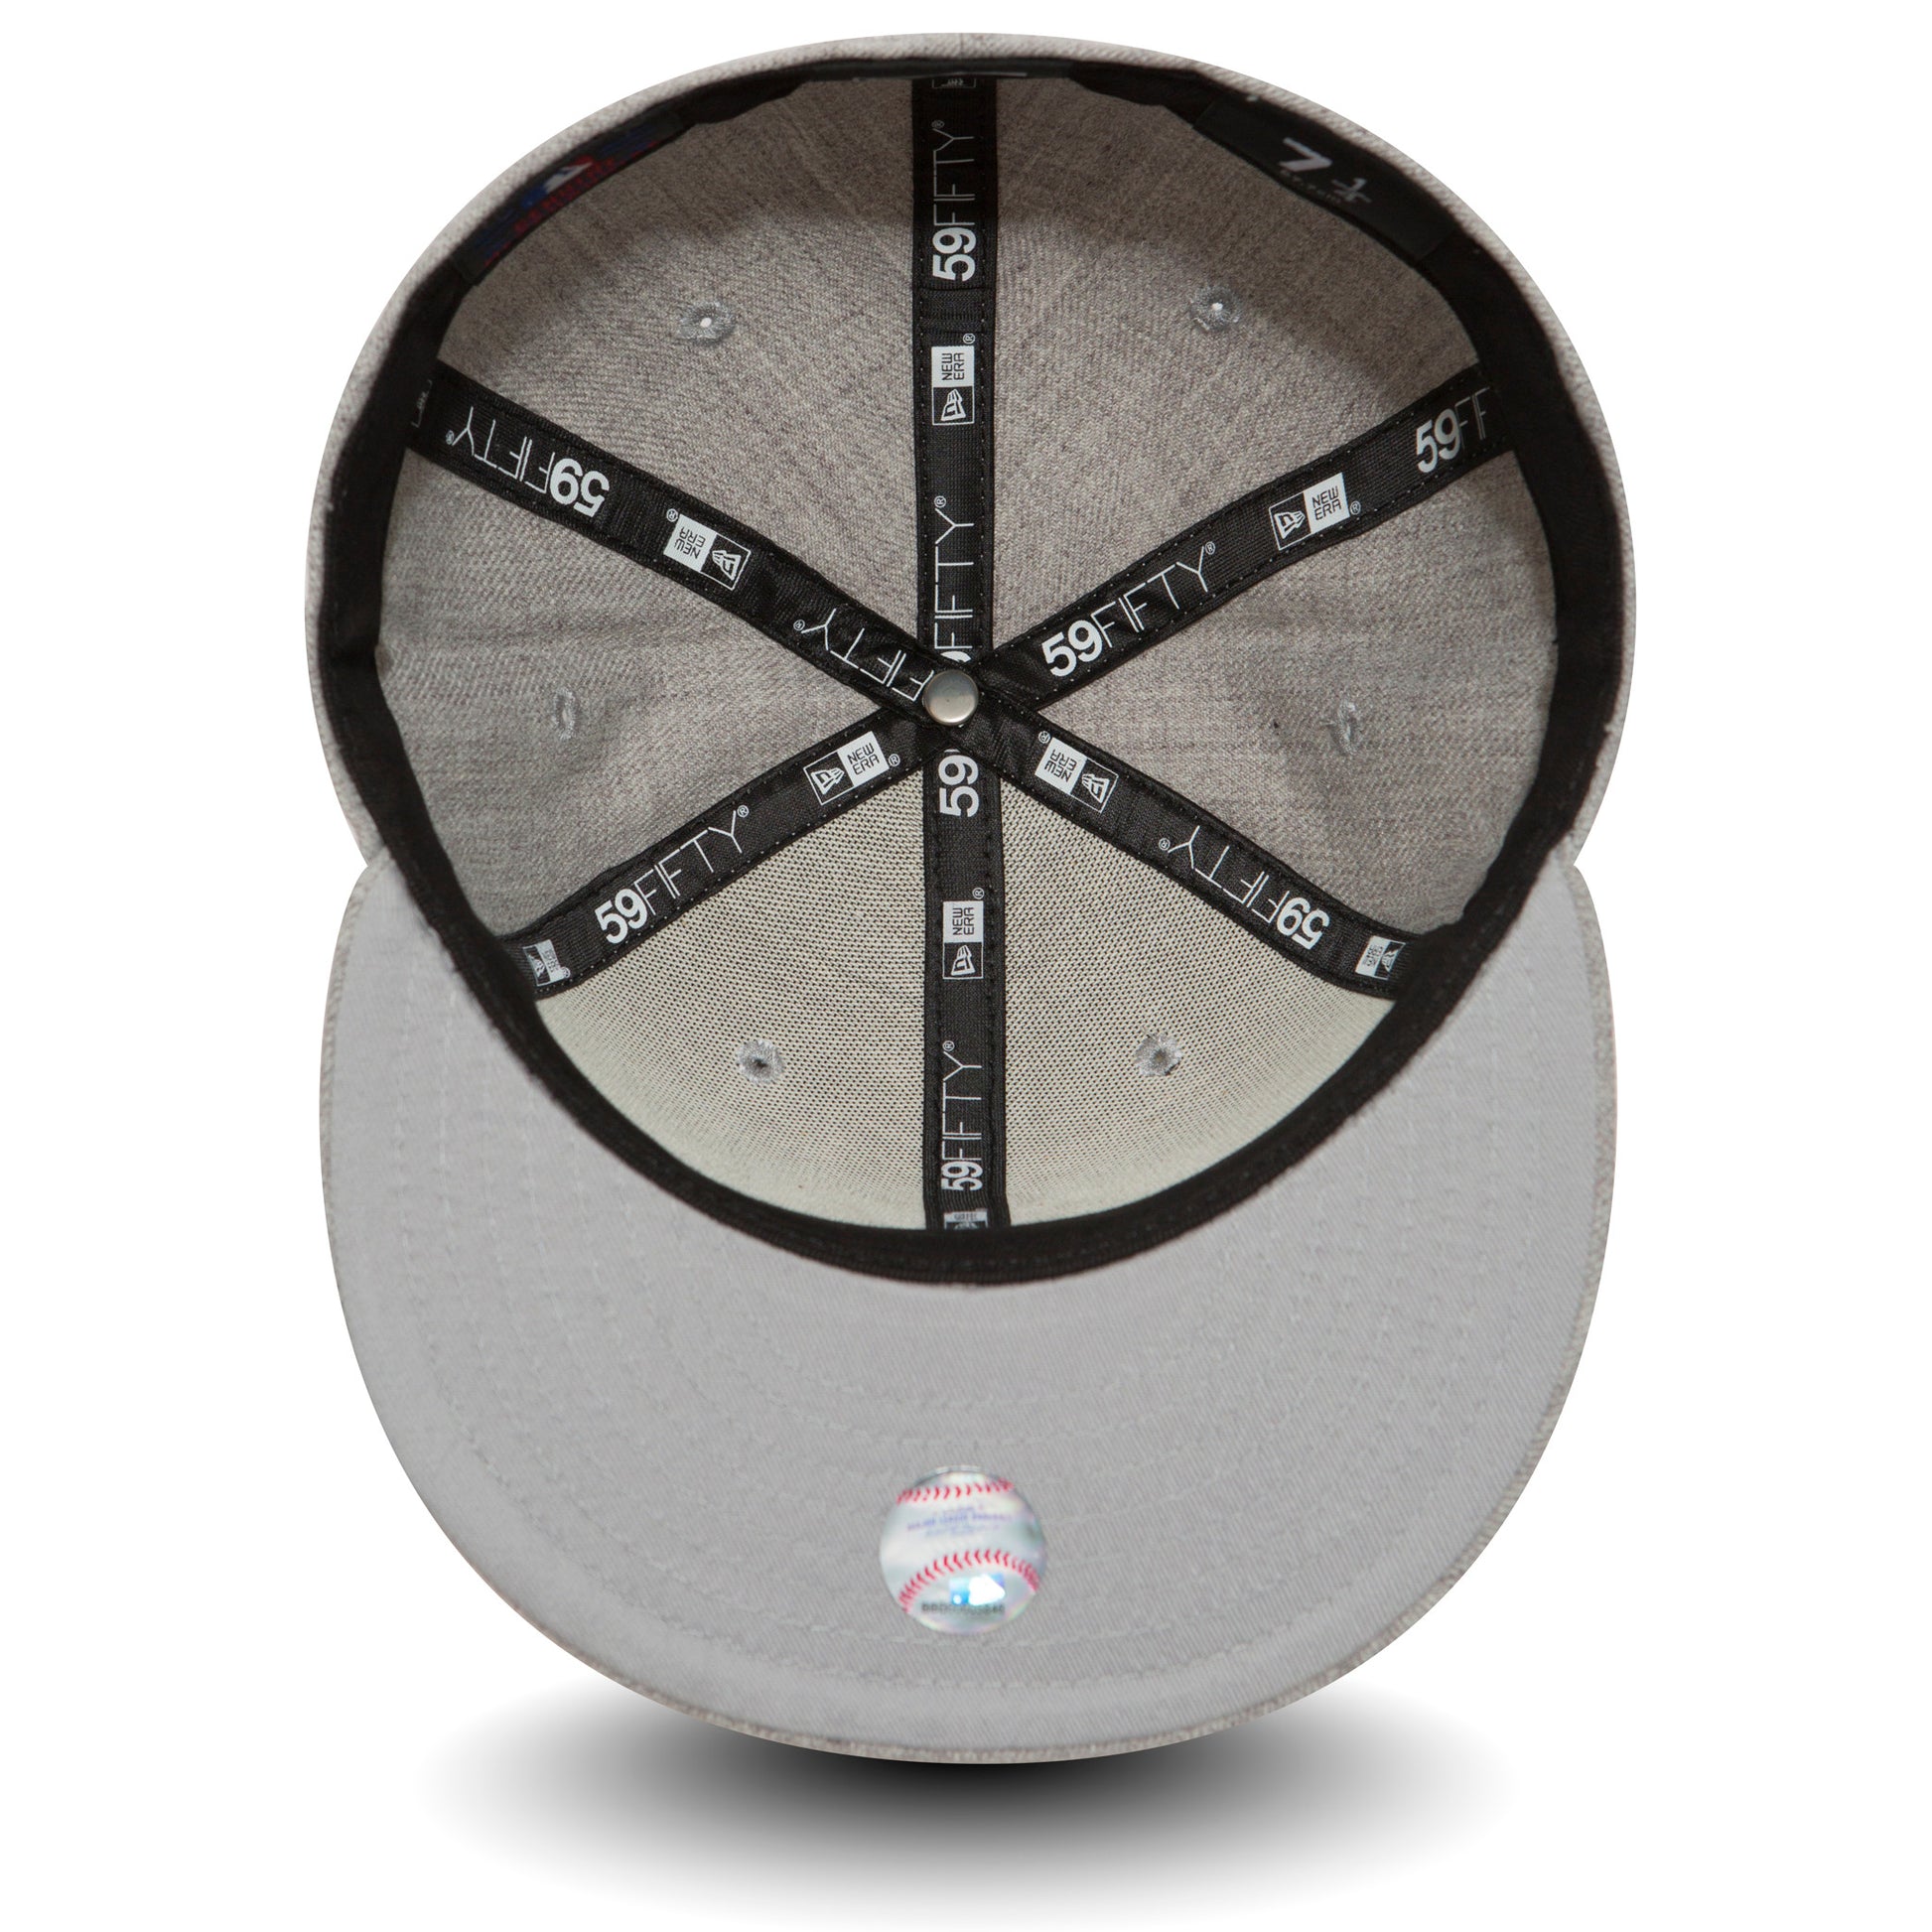 New York Yankees 59Fifty Fitted Cap - Heather Grey - Headz Up 